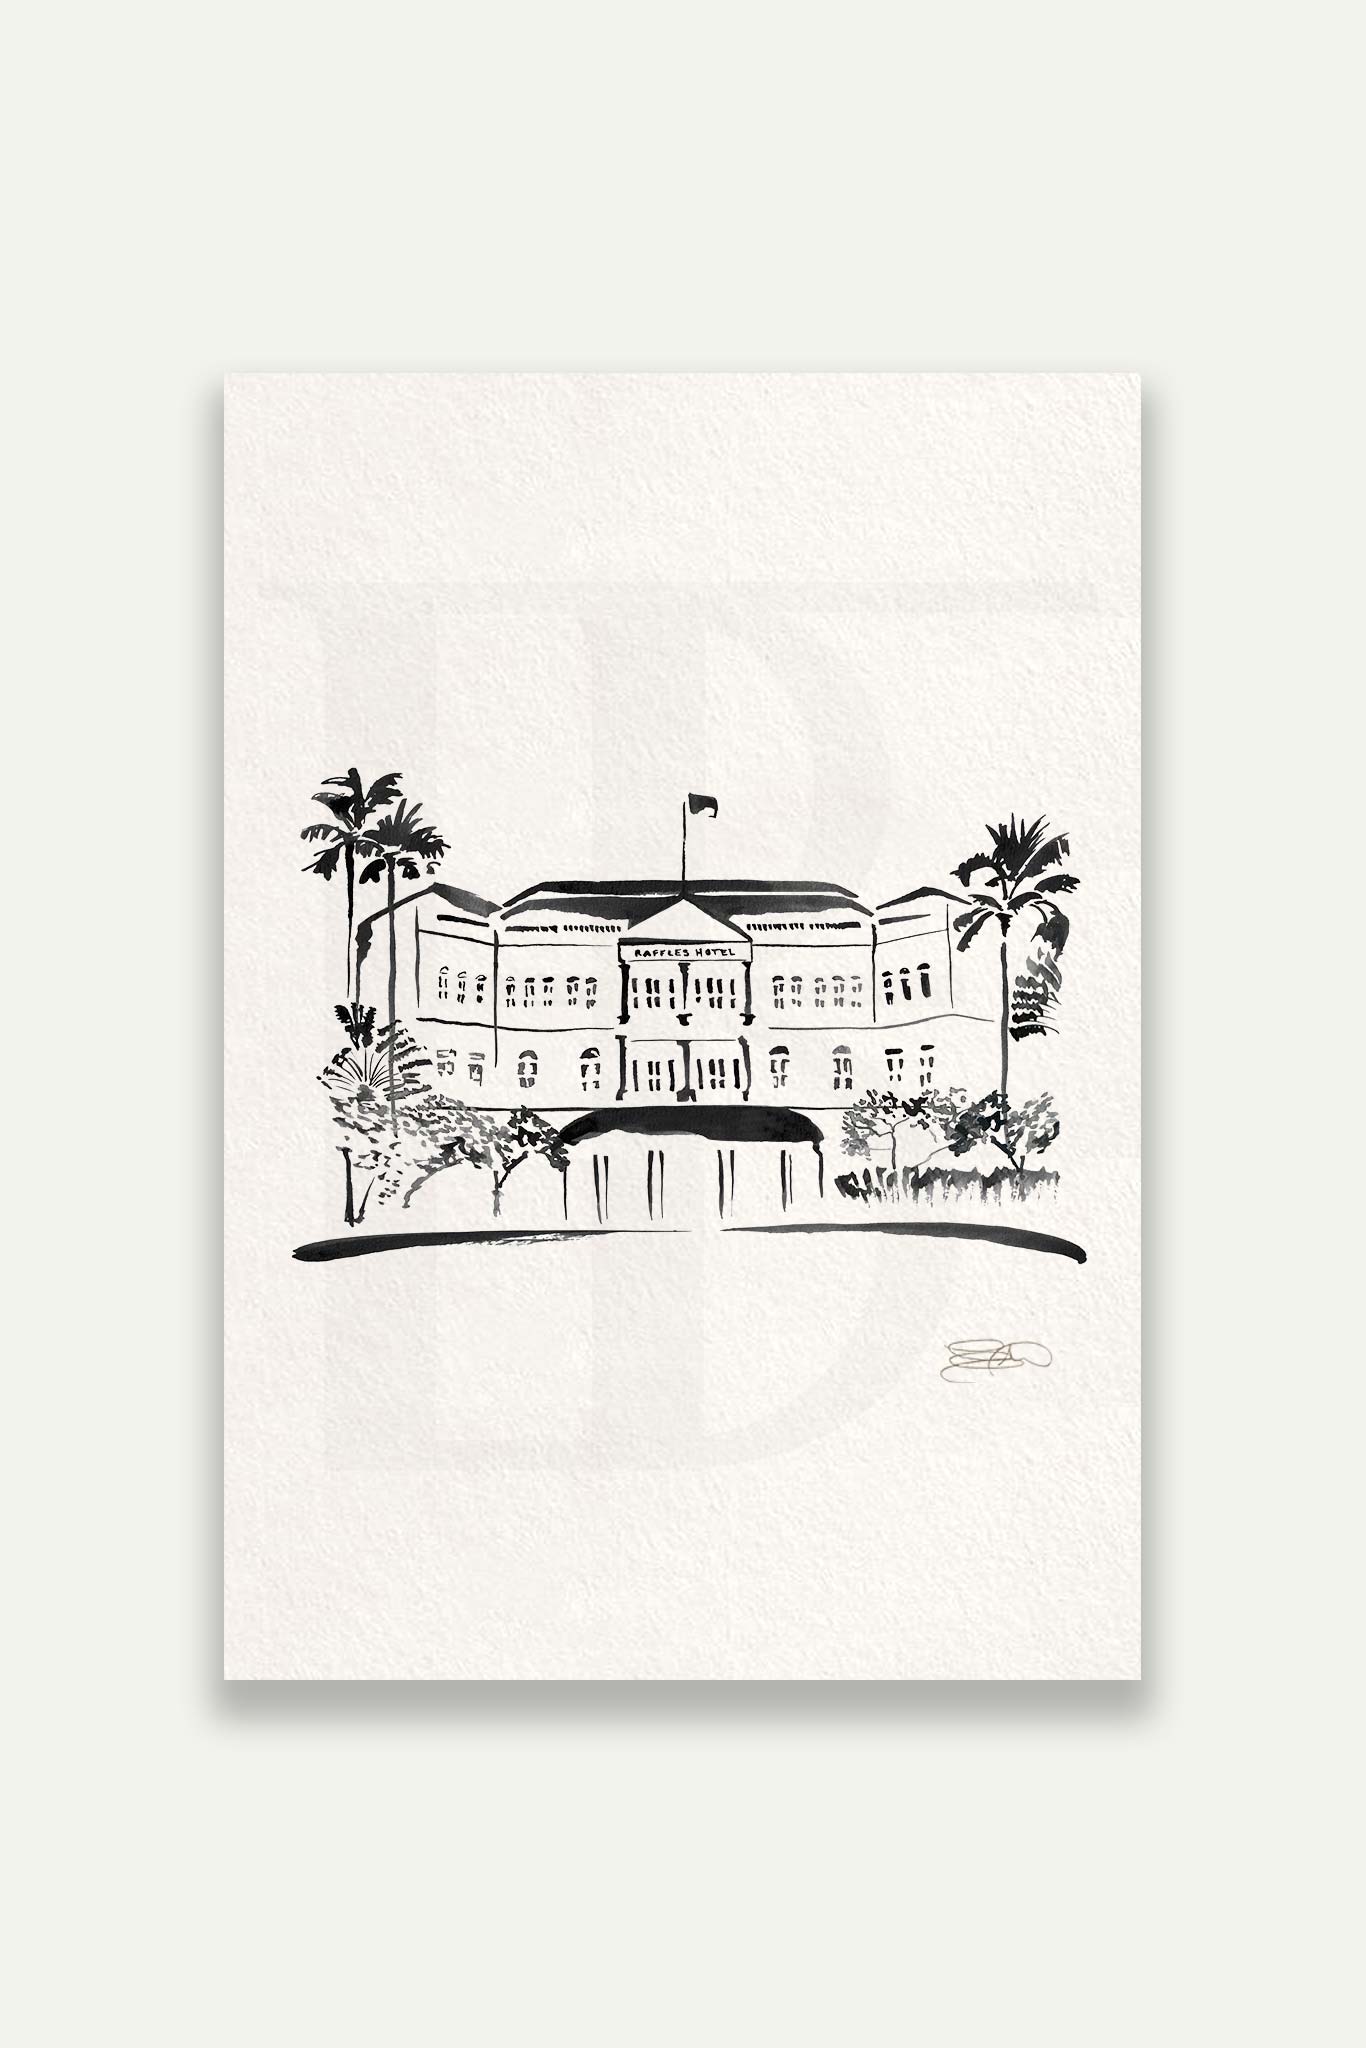 Raffles Hotel, by Fable